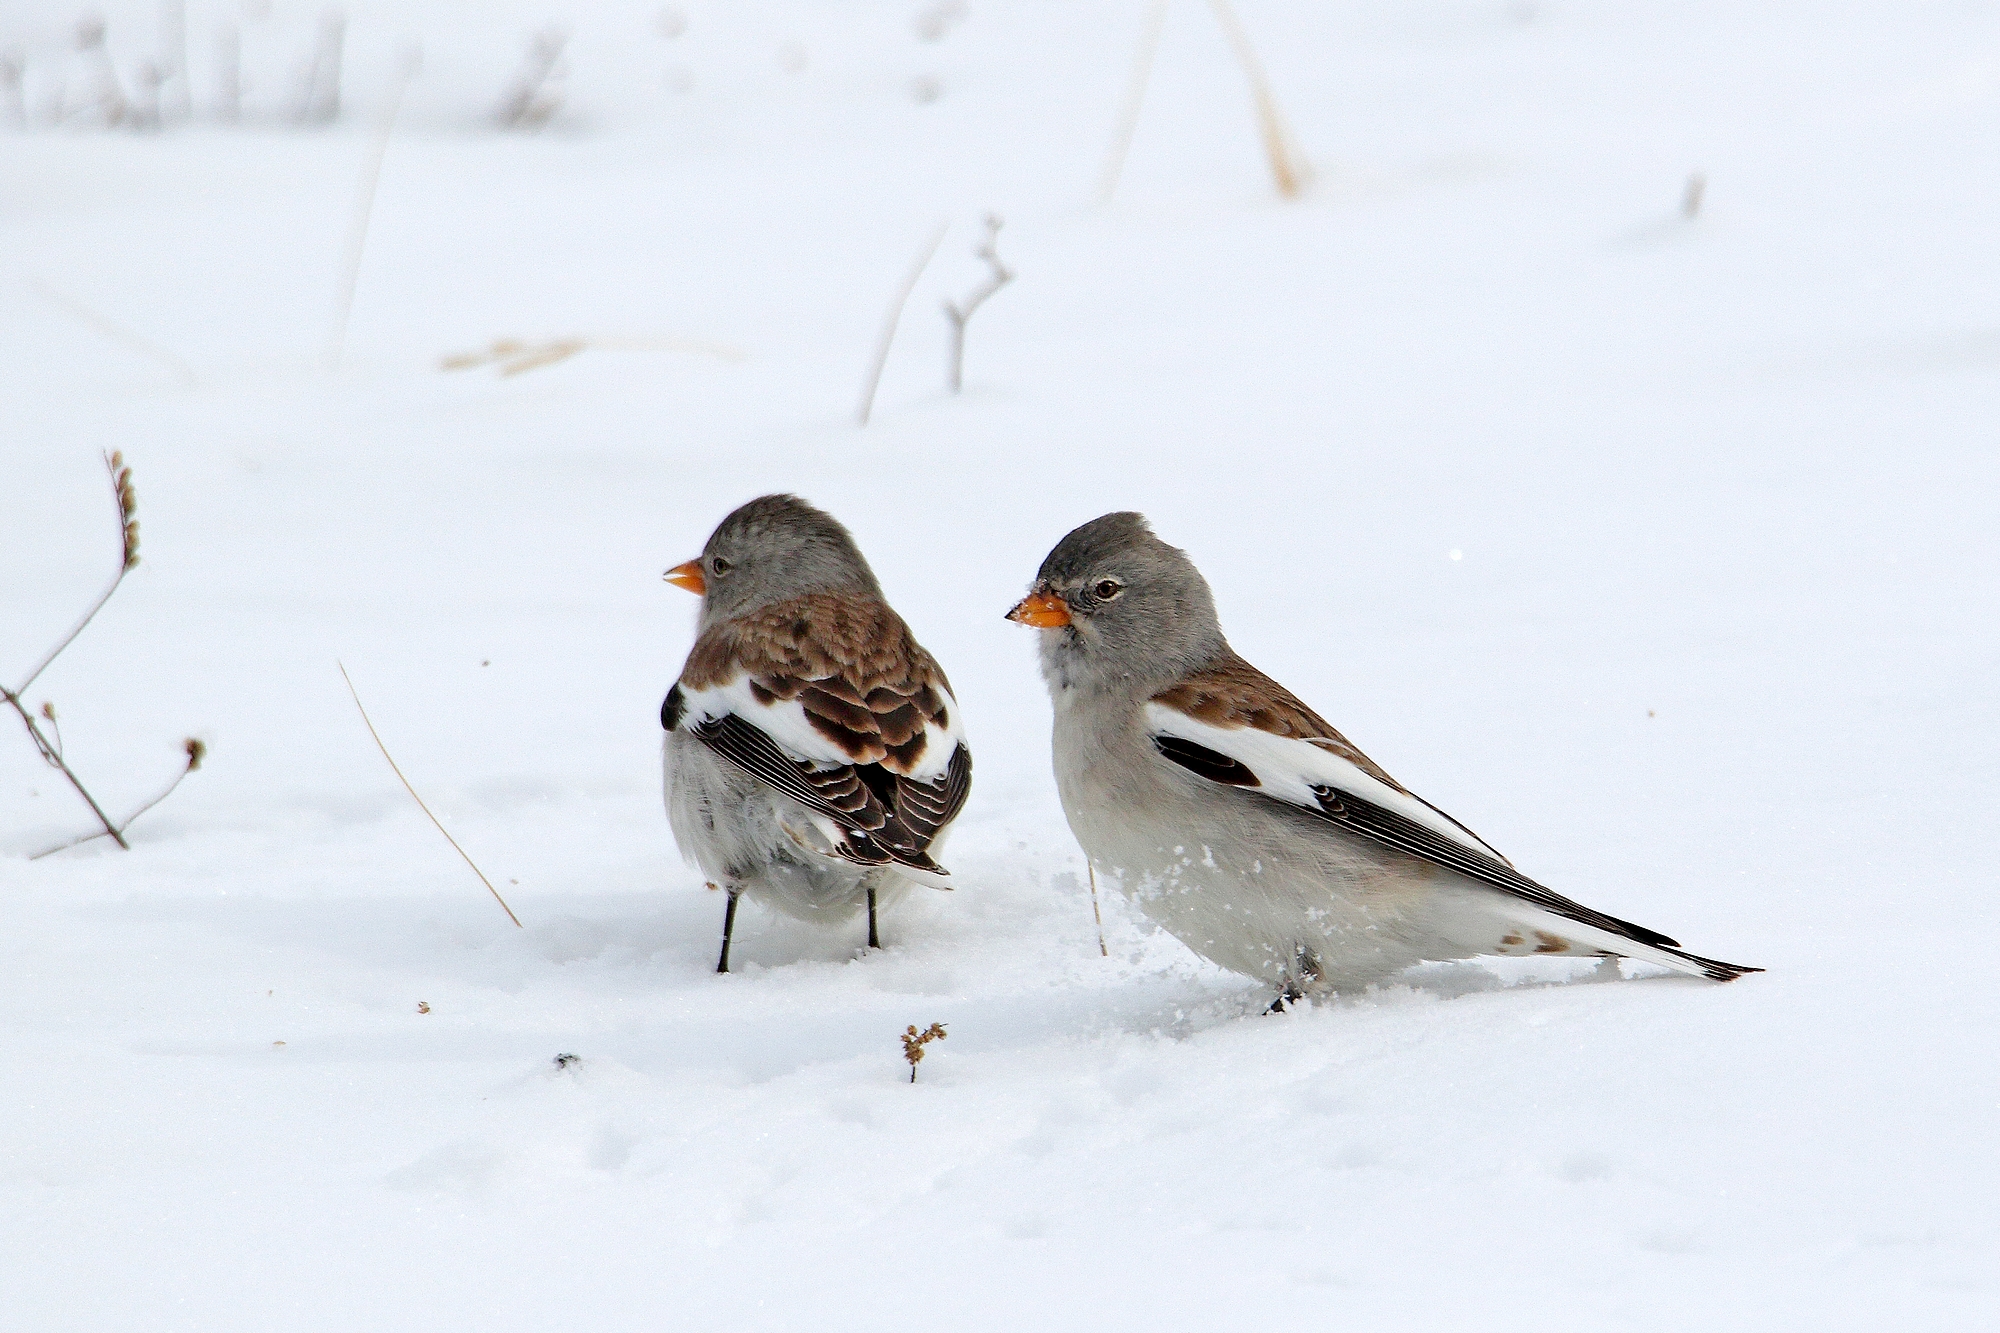 alpine finches in the snow...